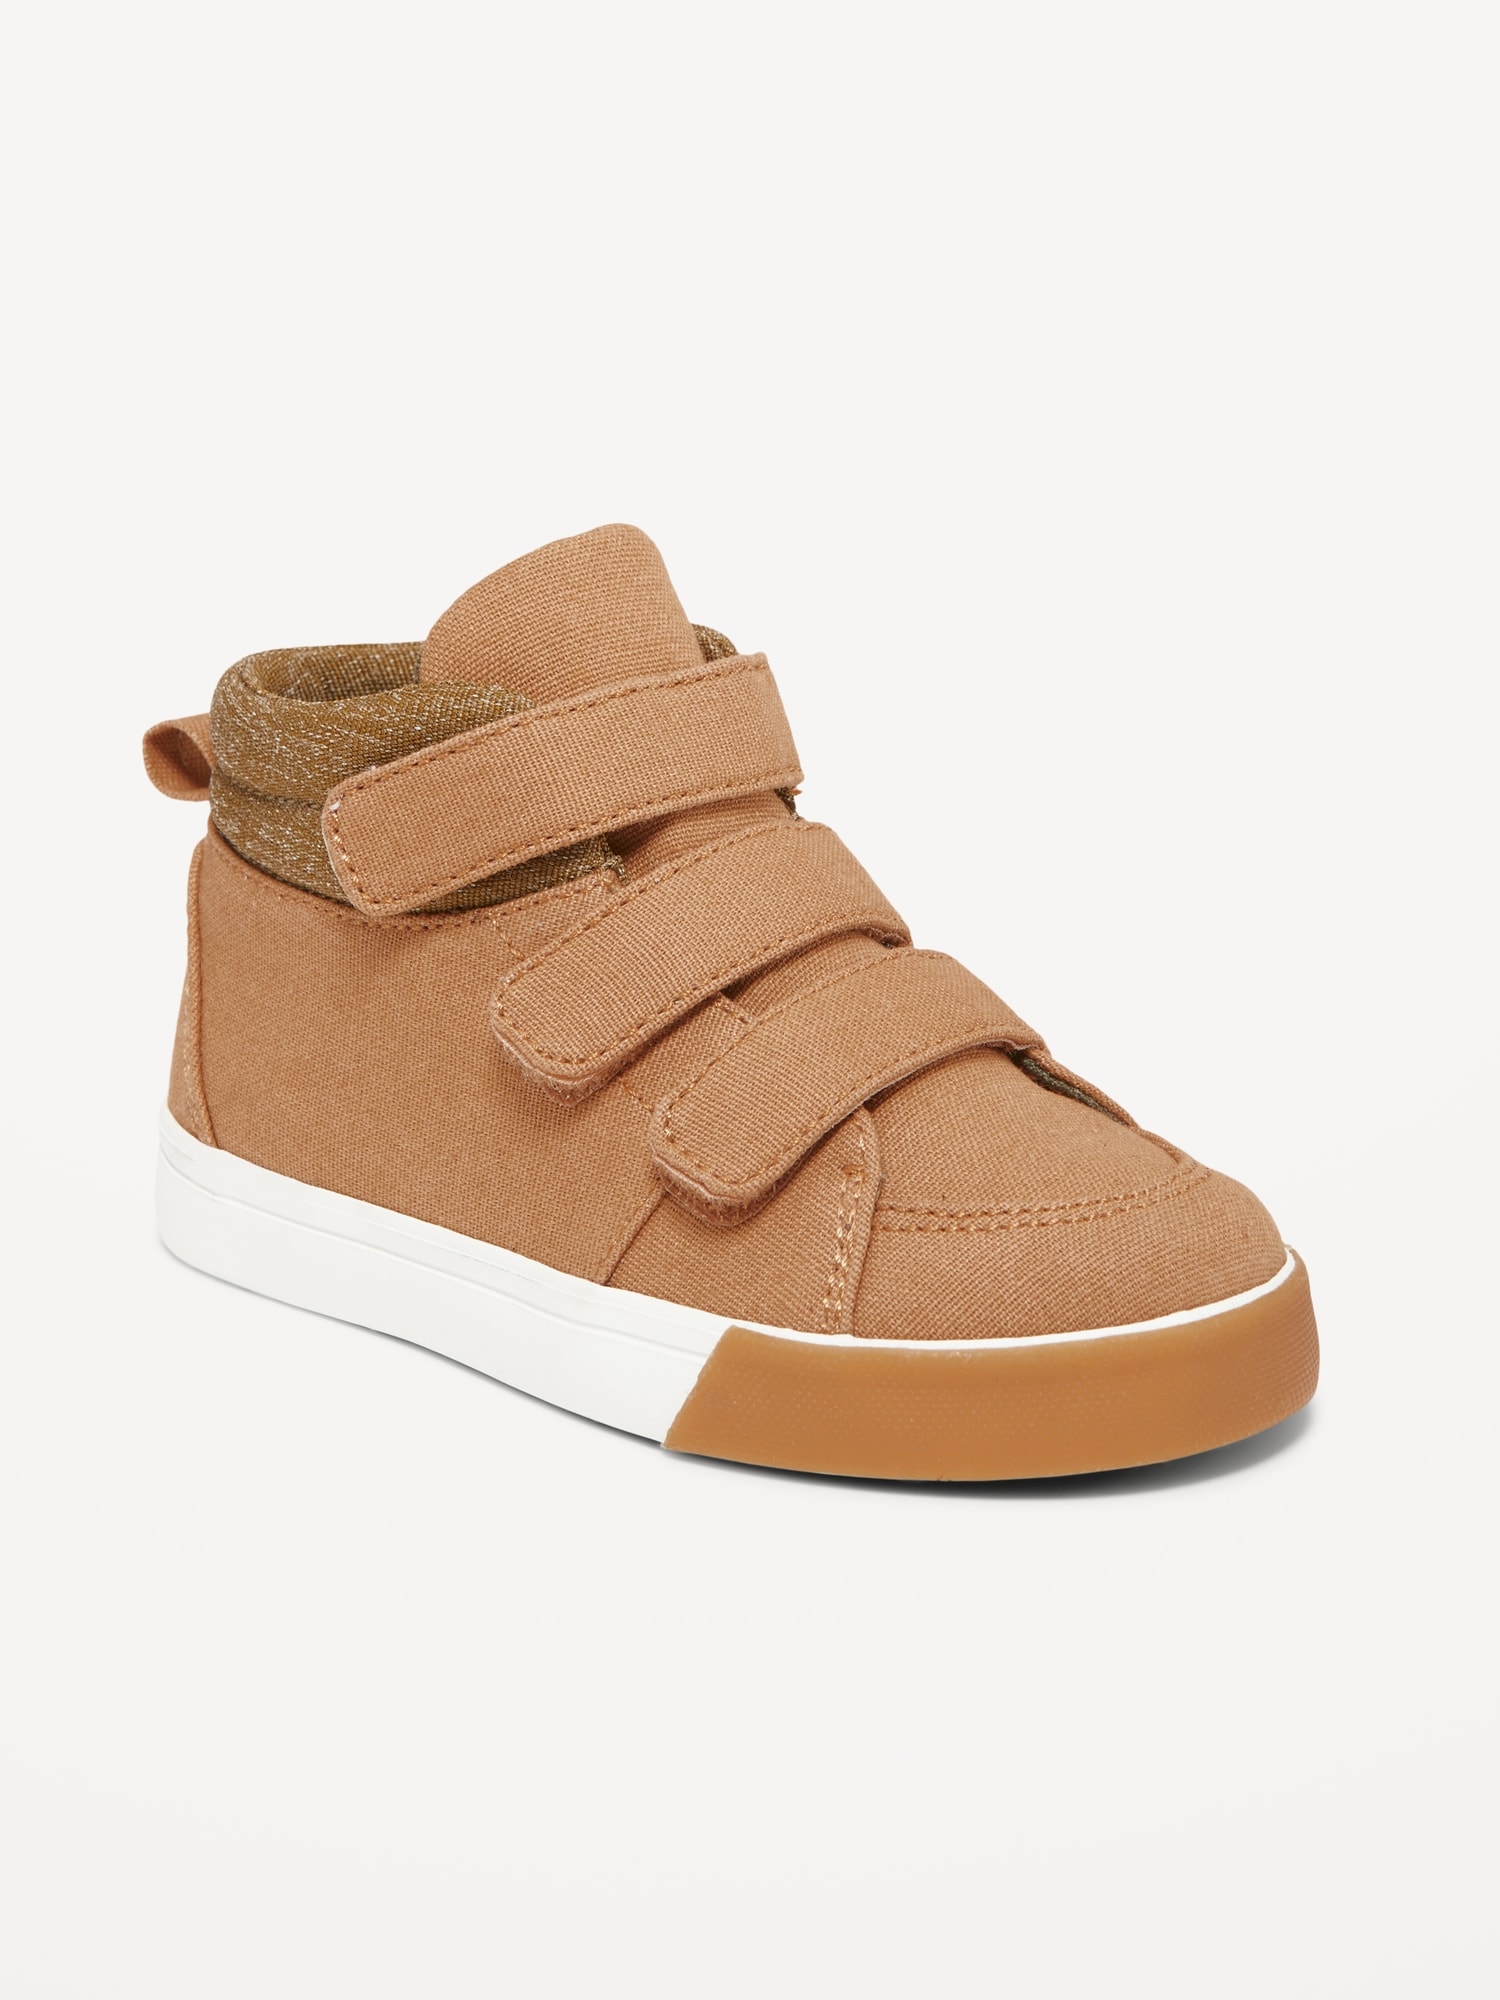 Oldnavy Canvas High-Top Secure-Strap Sneakers for Toddler Boys